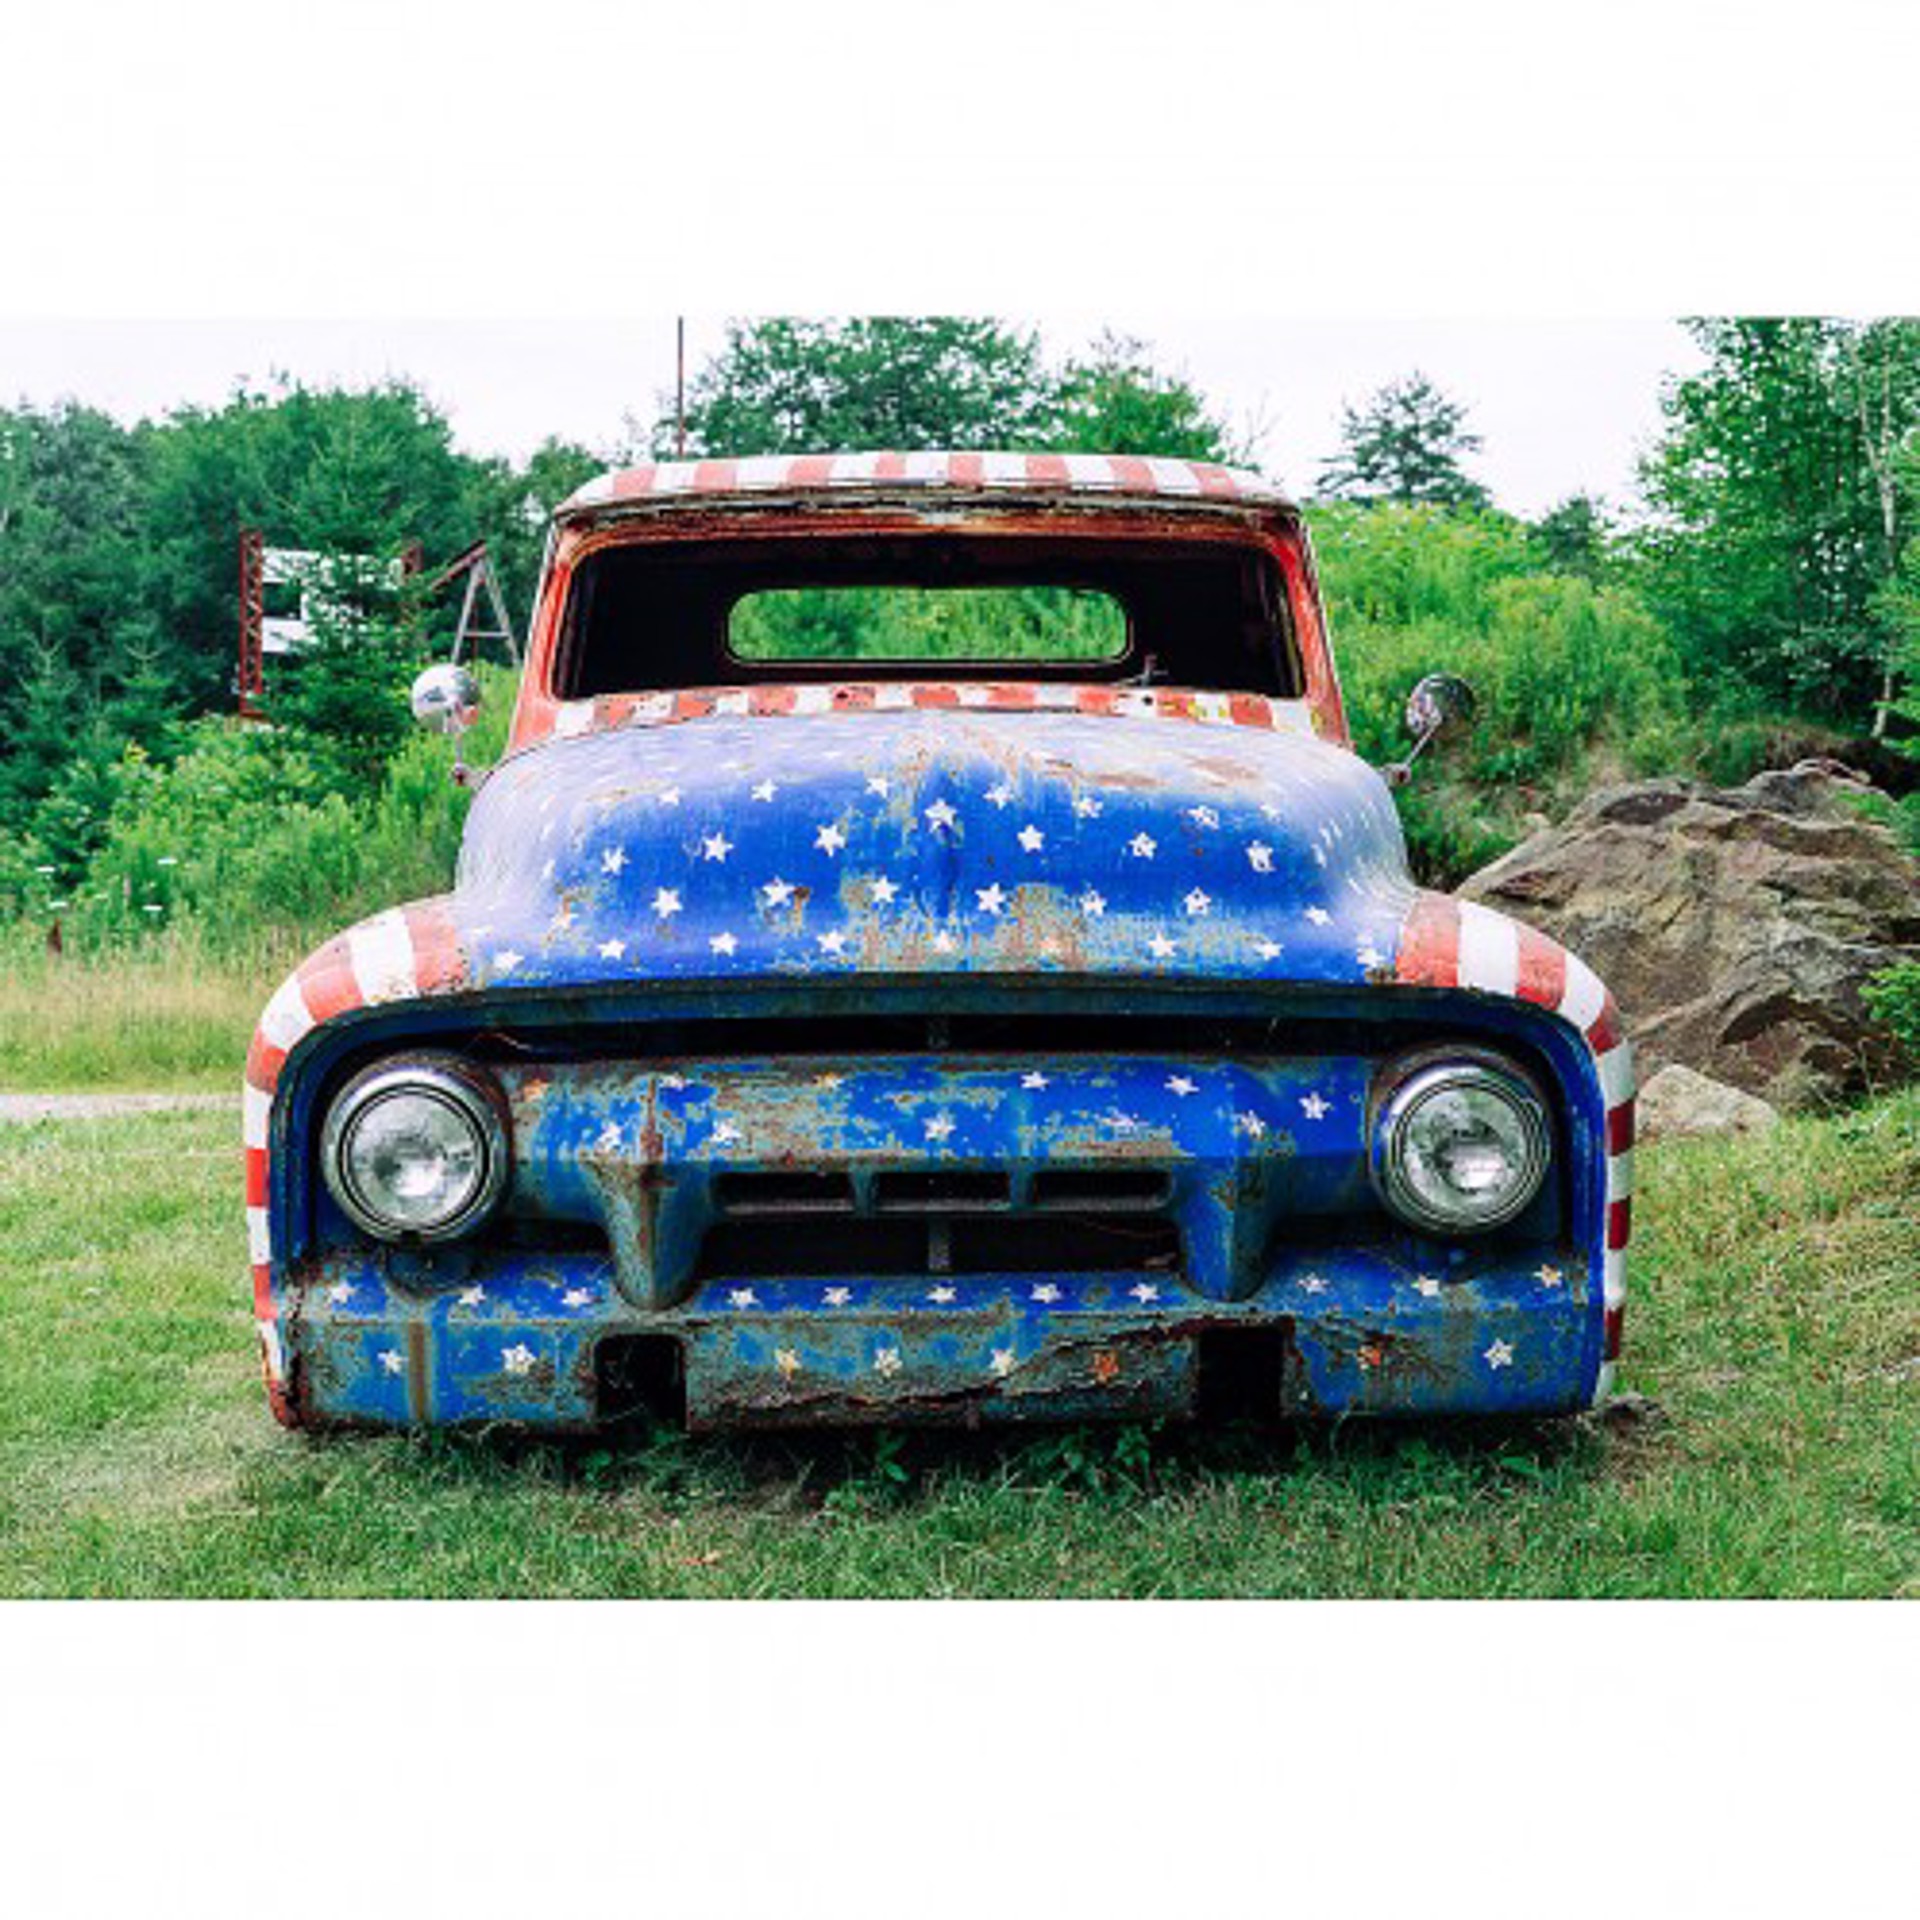 Stars and Stripes Truck by Peter Mendelson